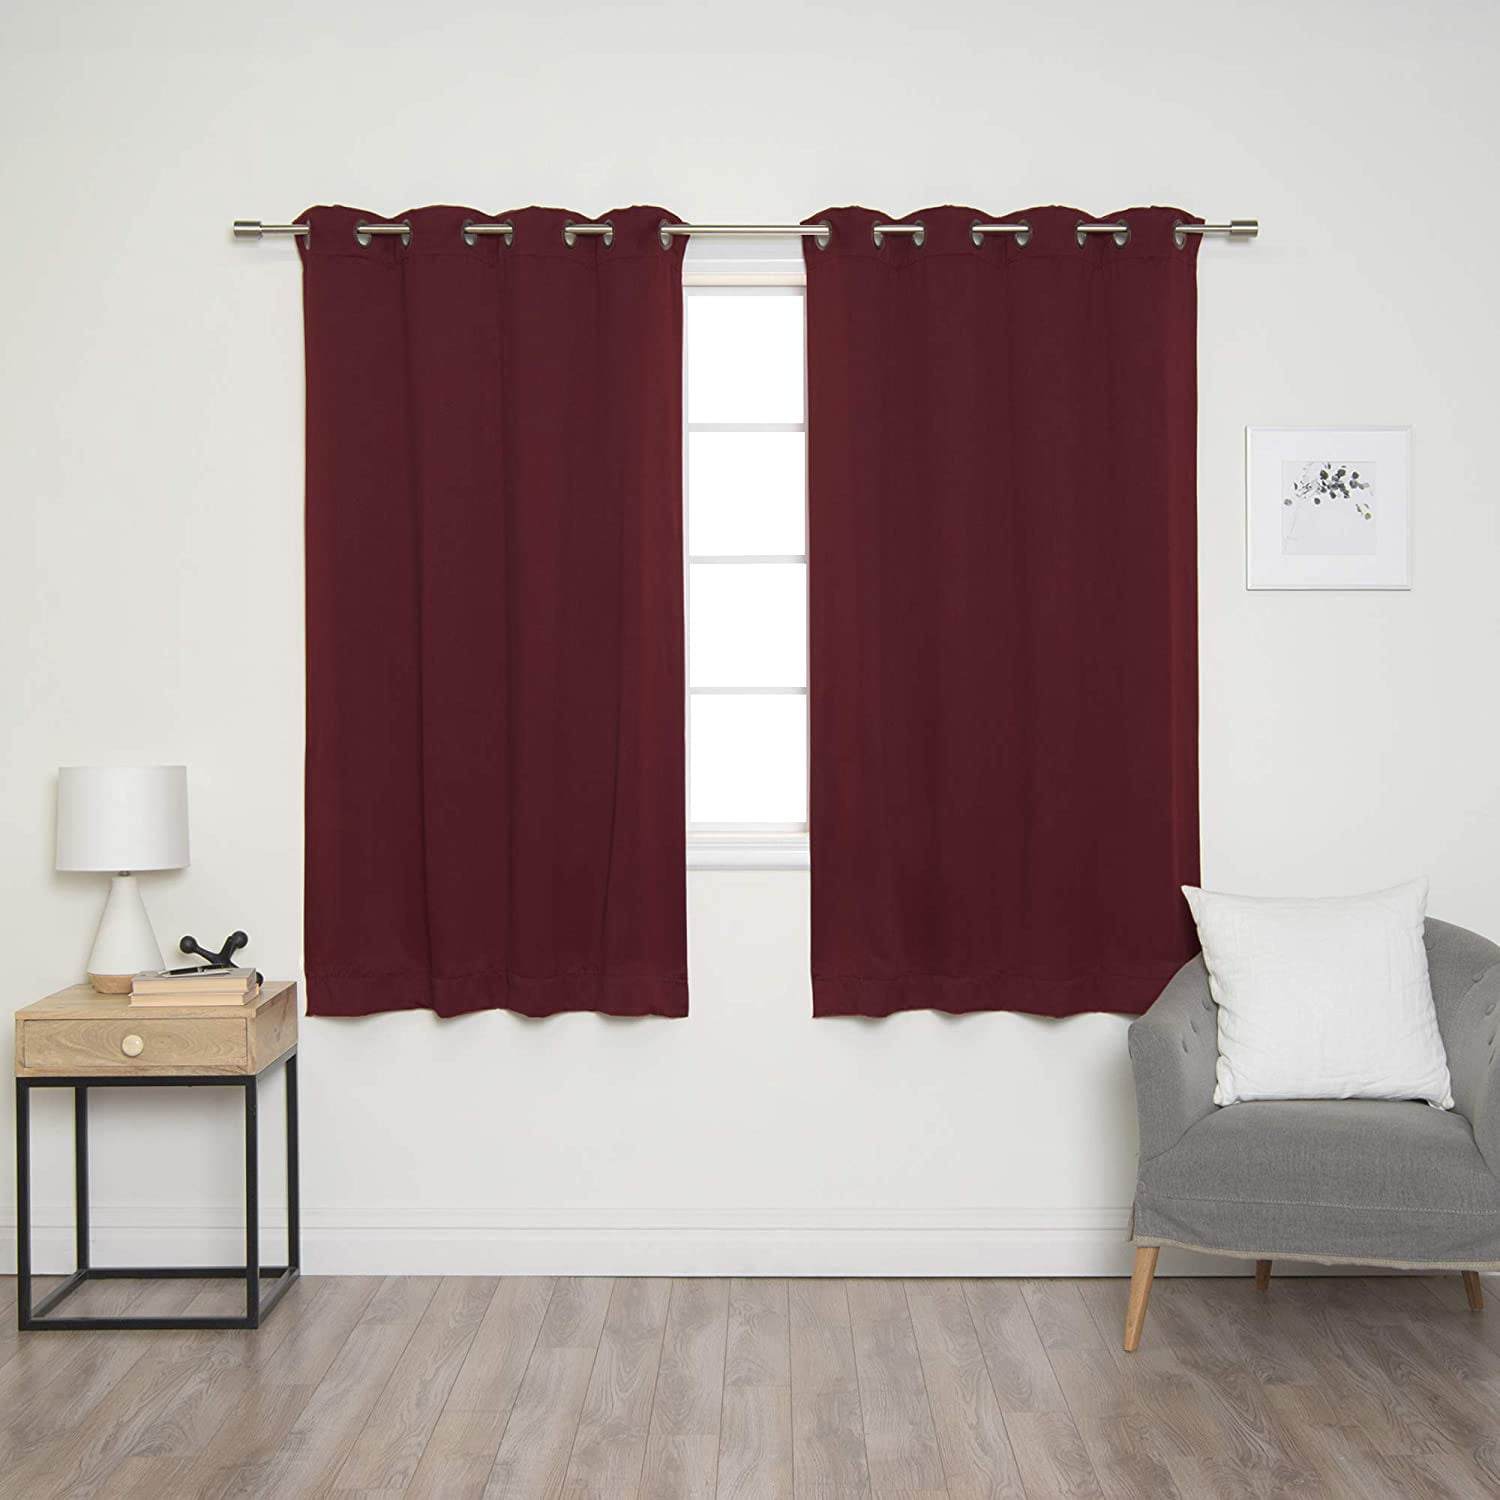 Quality Home Thermal Insulated Blackout Curtains - Antique Bronze